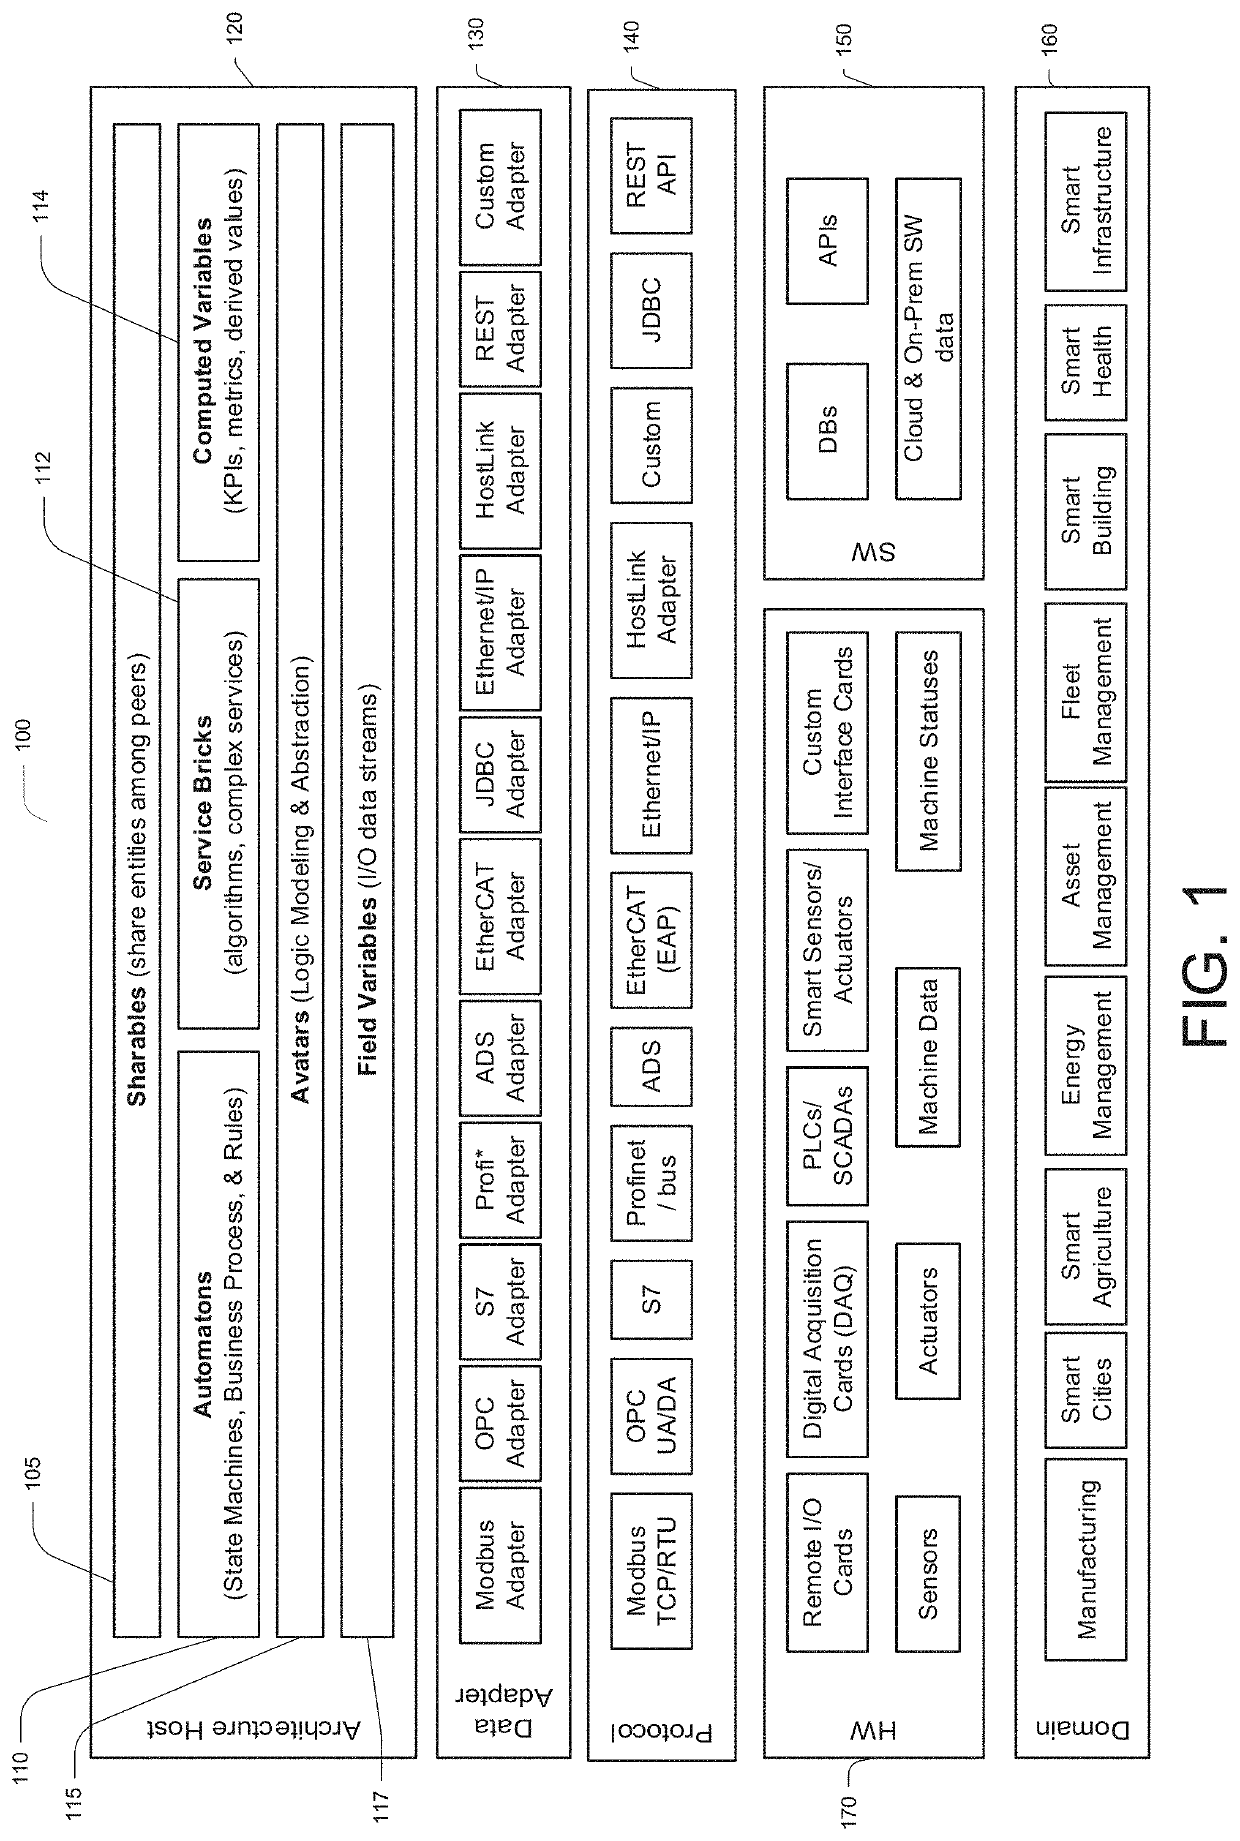 Systems, devices, and methods for internet of things integrated automation and control architectures